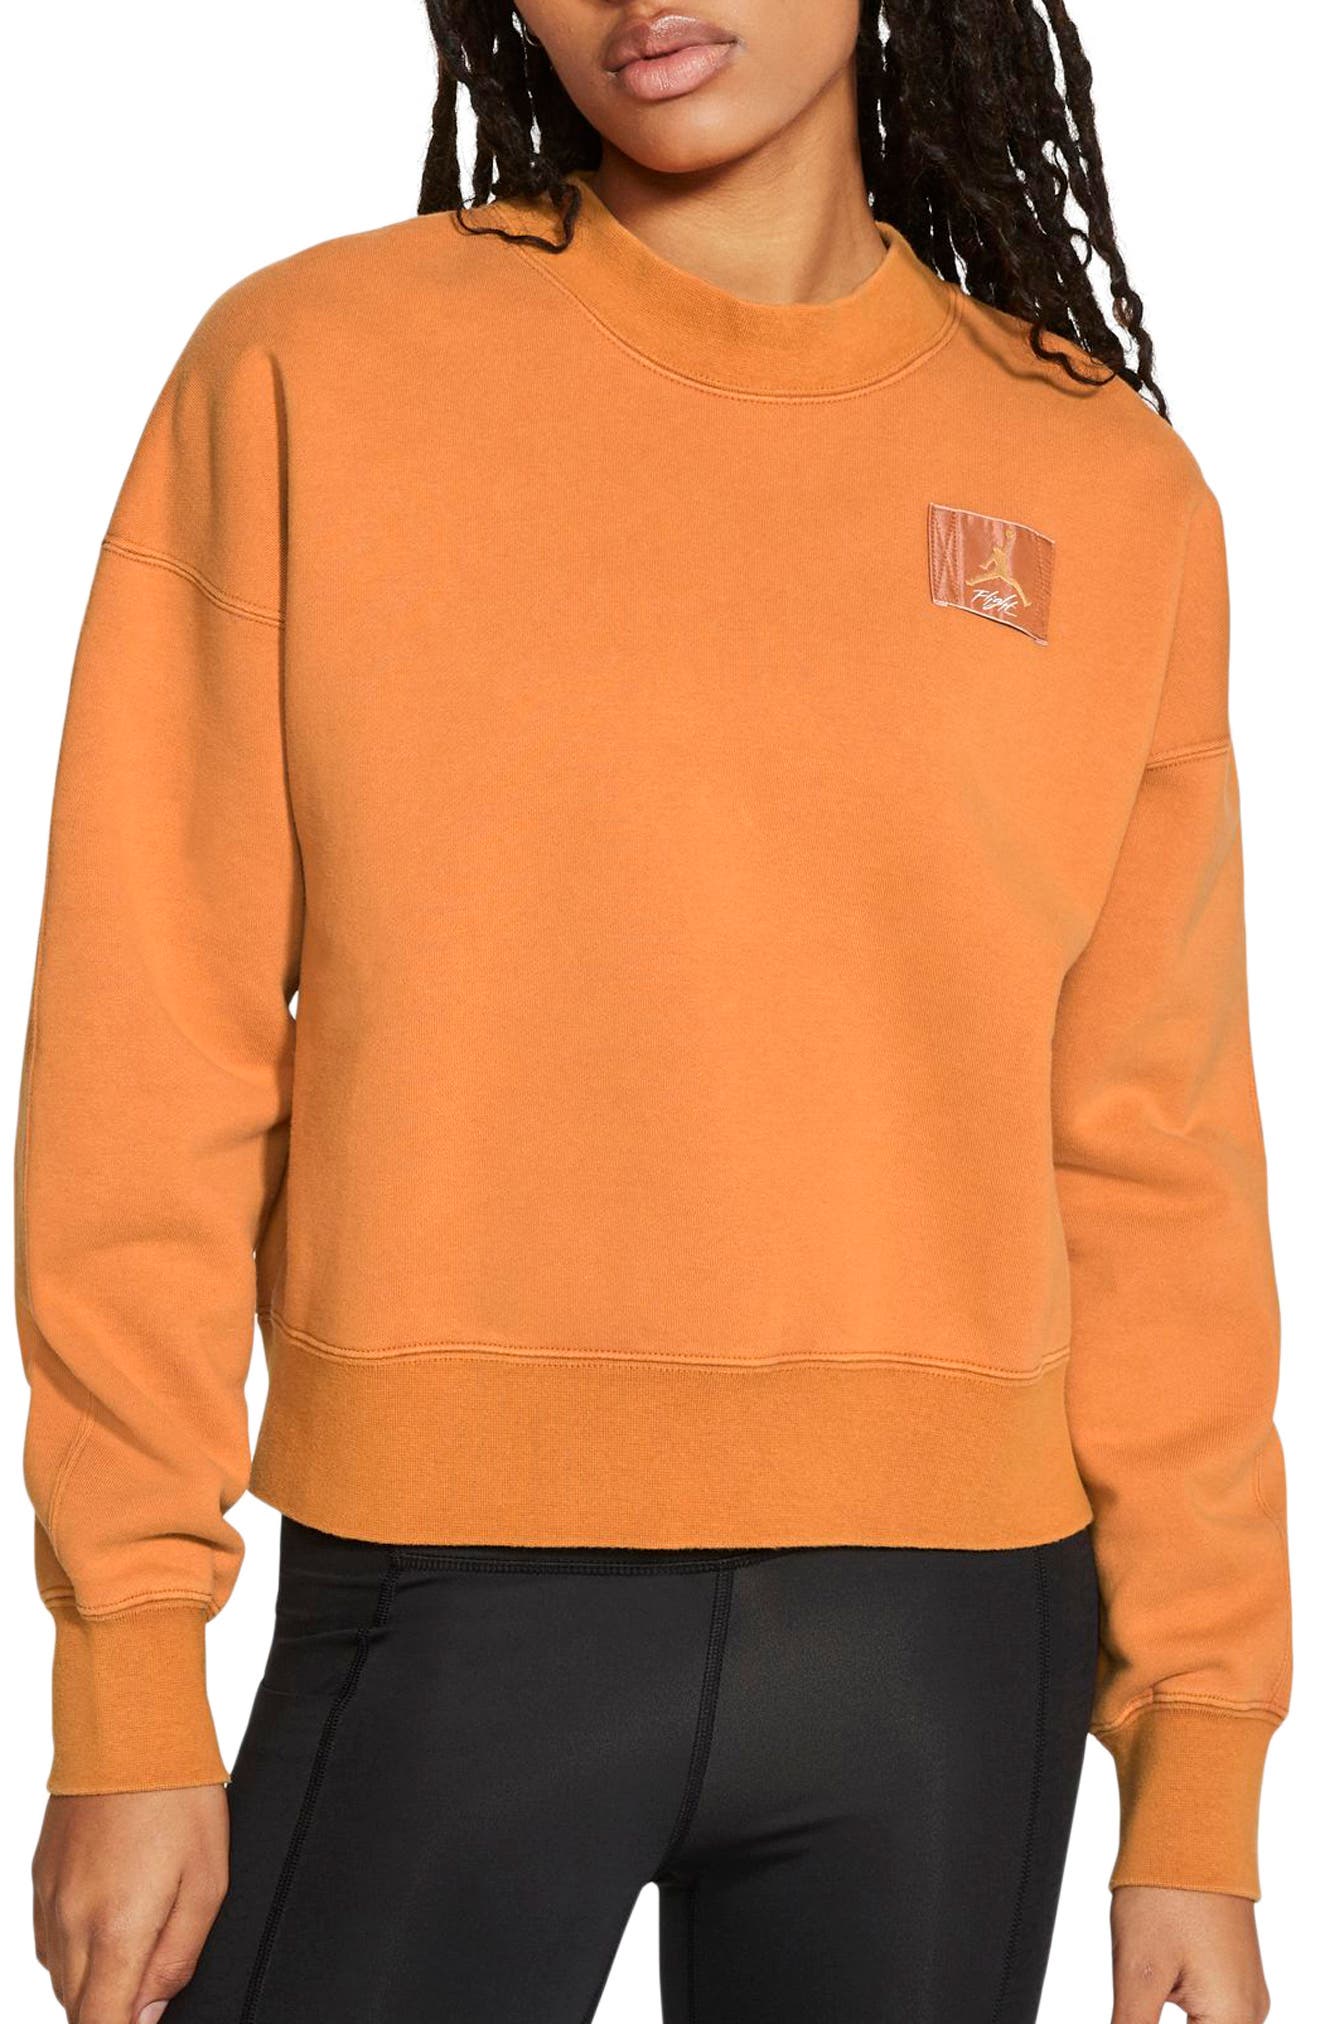 nike crew neck outfit